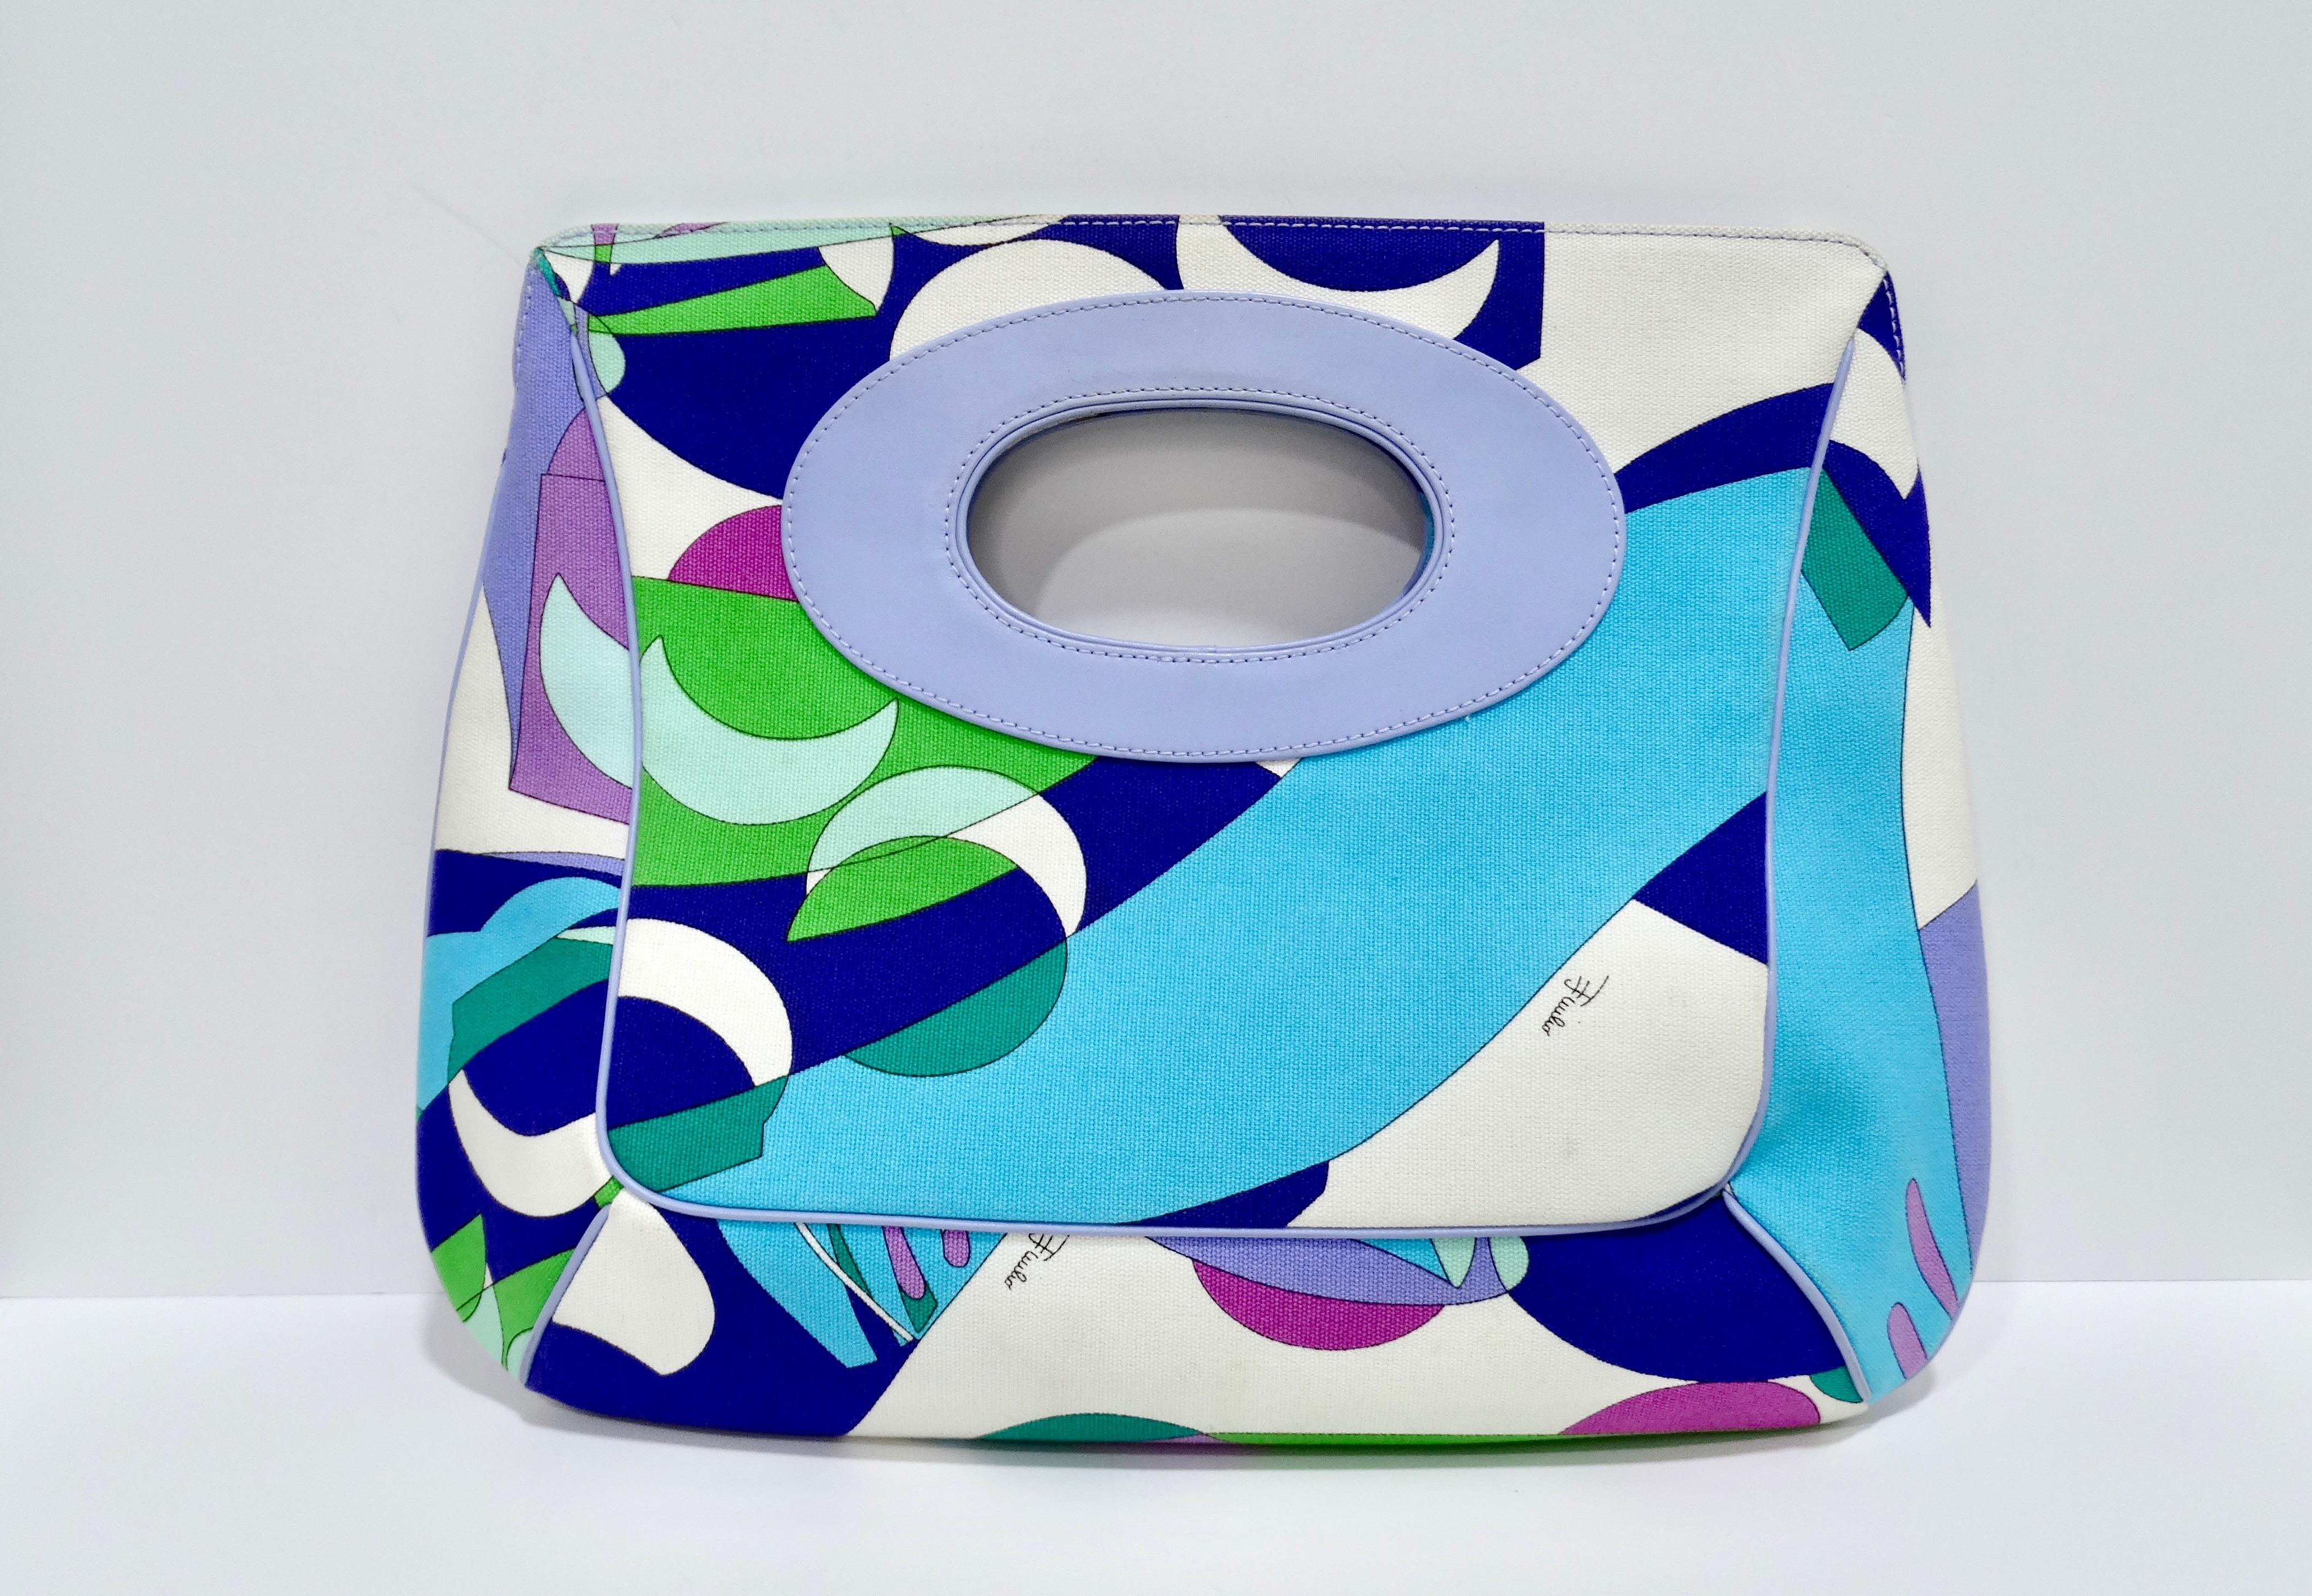 Summer is coming and you need to add a printed Pucci to your collection. Emilio Pucci is known for his fluid shapes, kaleidoscopic motifs, and bright colors. This features a leather handle, large monogramed interior, canvas fabric, and a groovy